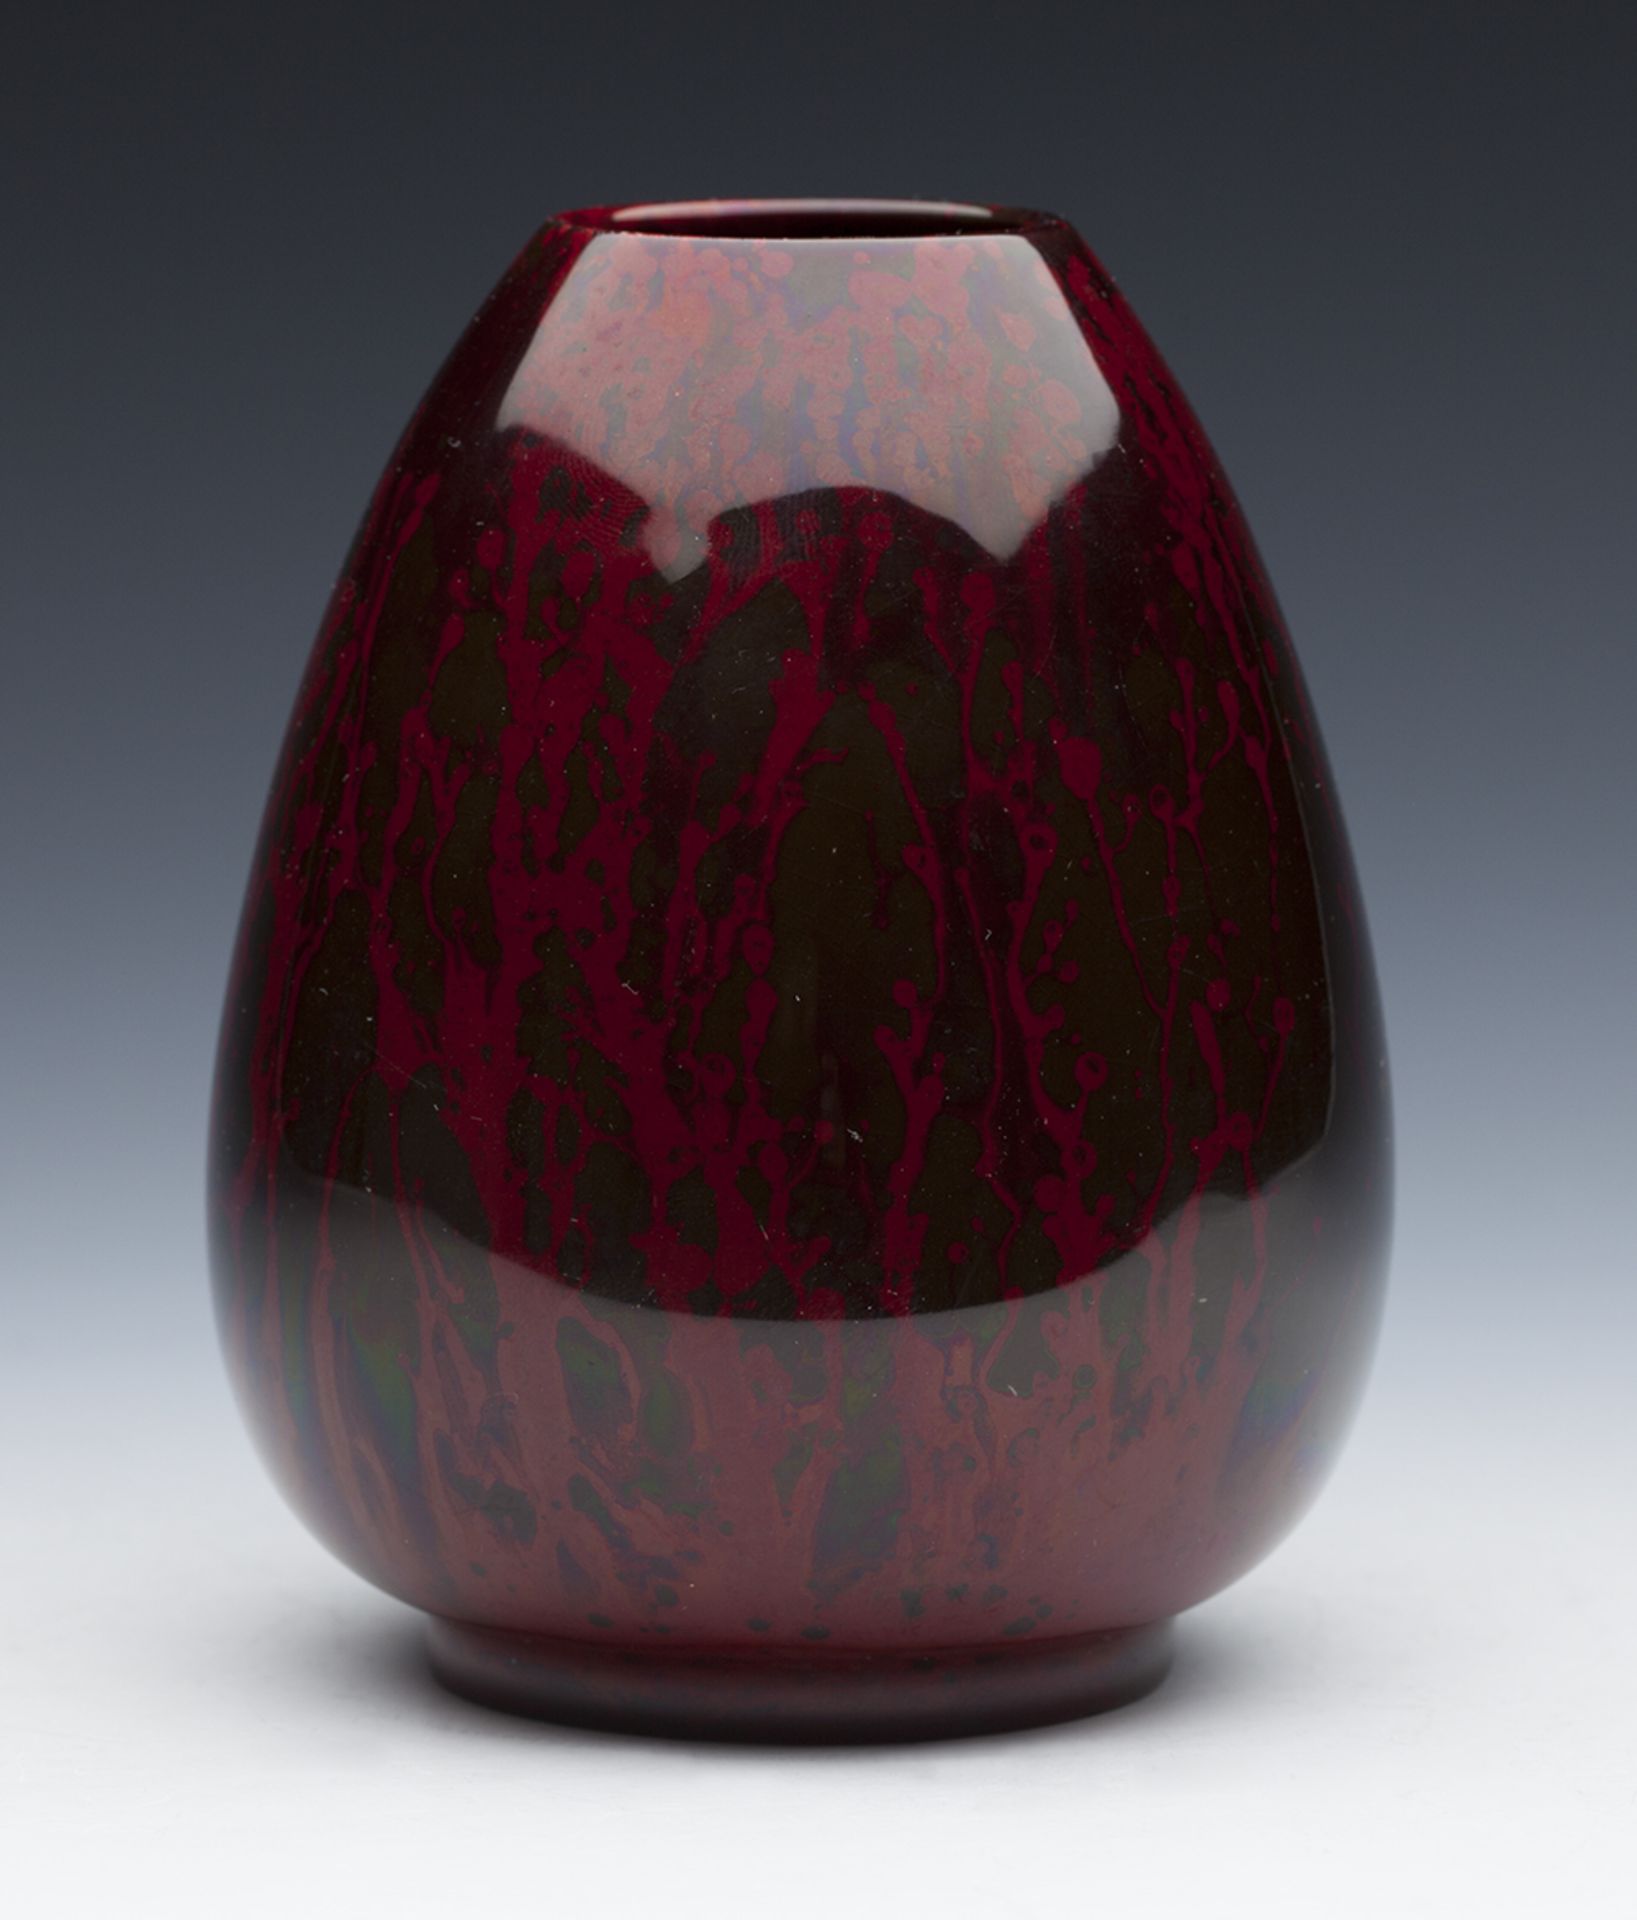 ART NOUVEAU HOWSONS ART POTTERY RED FLAMBE VASE DATED 1912 - Image 4 of 11